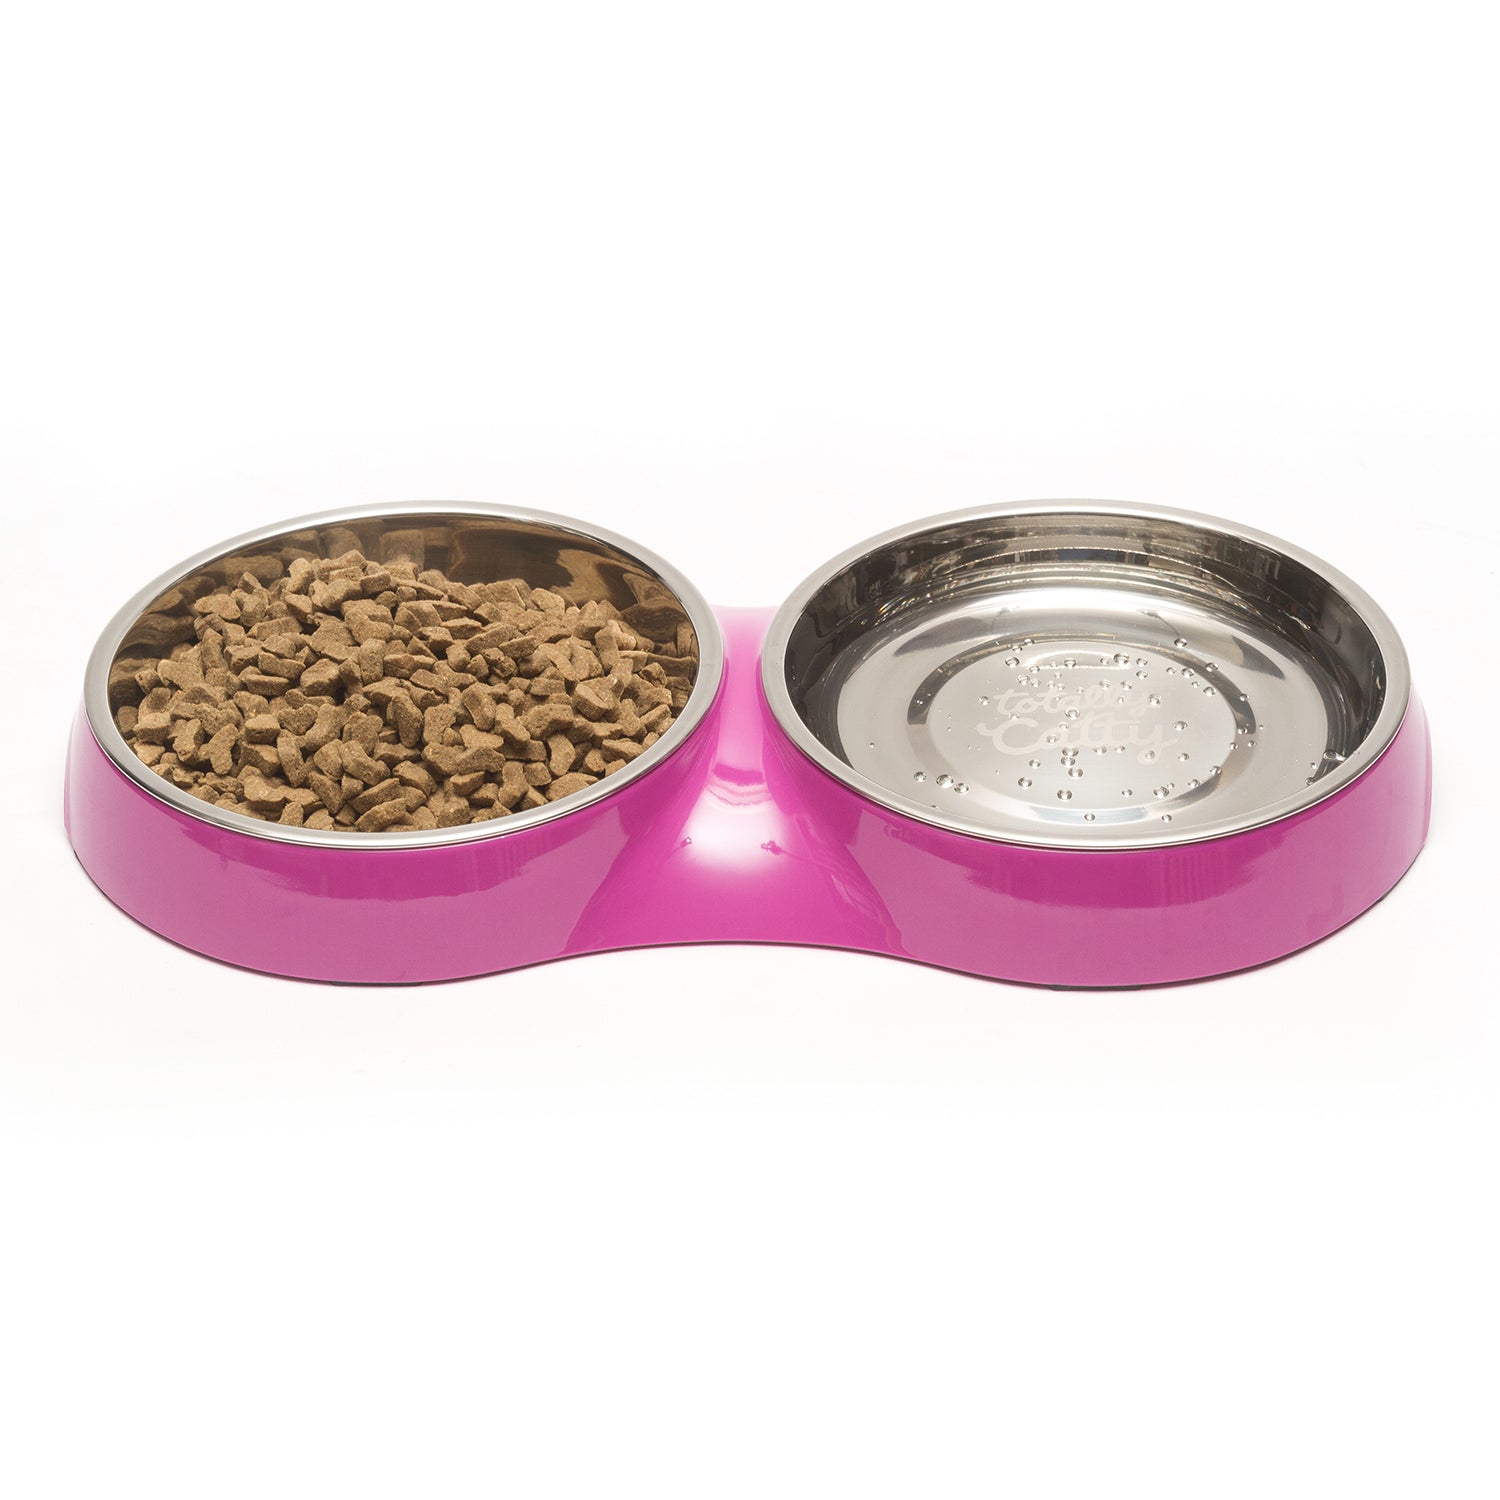 Space saving double cat bowl.  Water and food side by side.  Non slip design. 